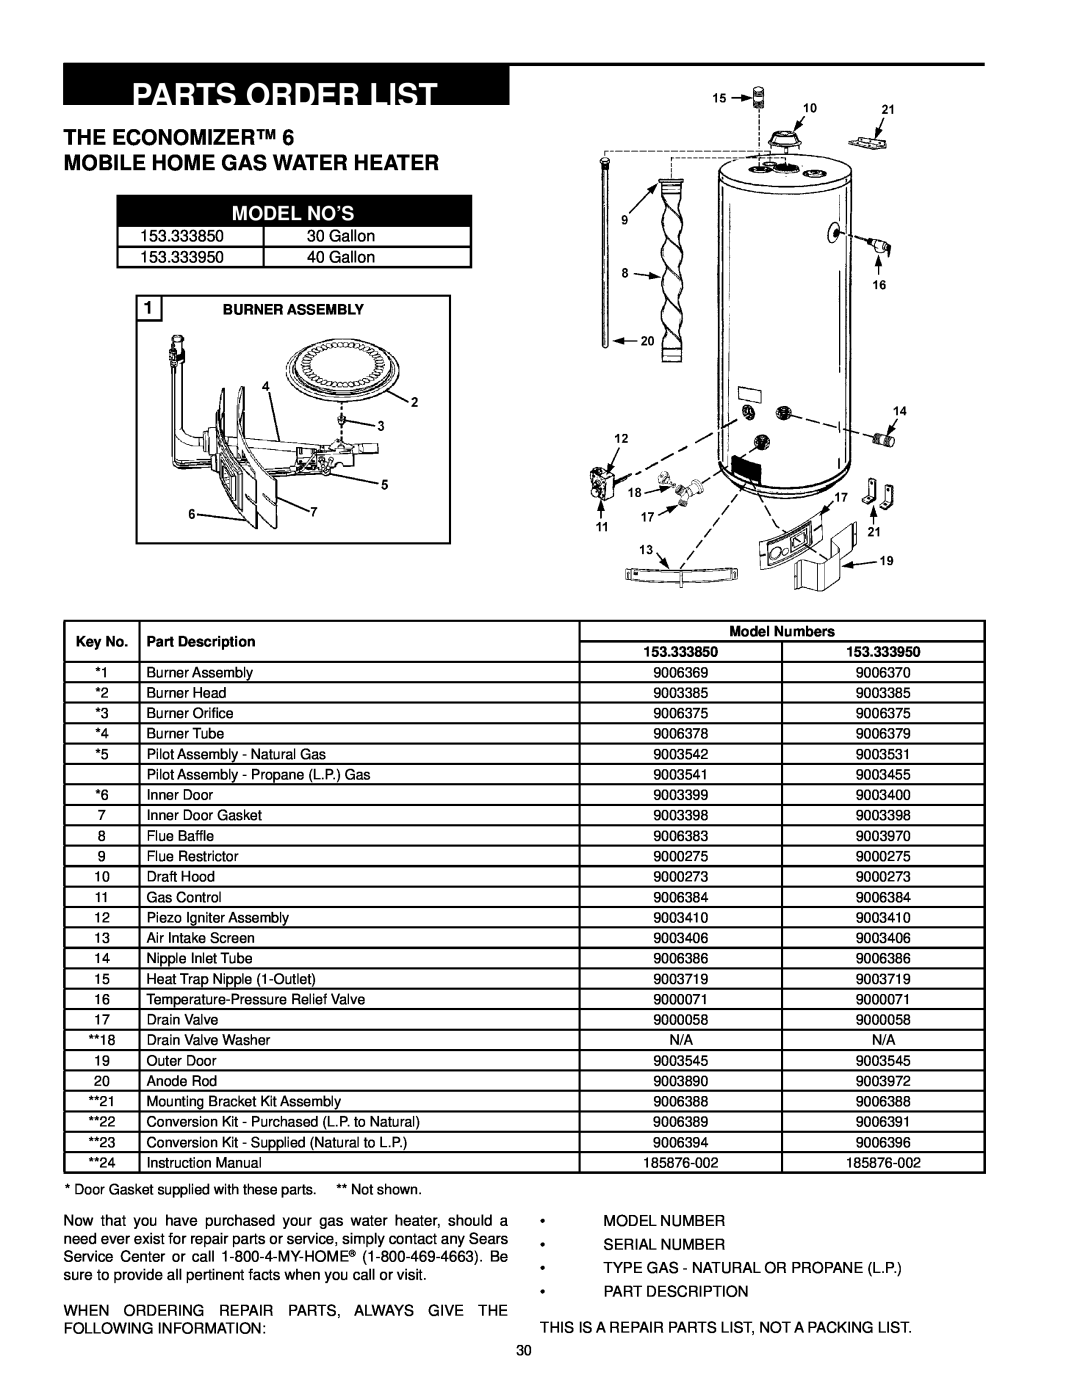 Kenmore 153.33385 owner manual Parts Order List, The Economizer Mobile Home Gas Water Heater, Model No’S 